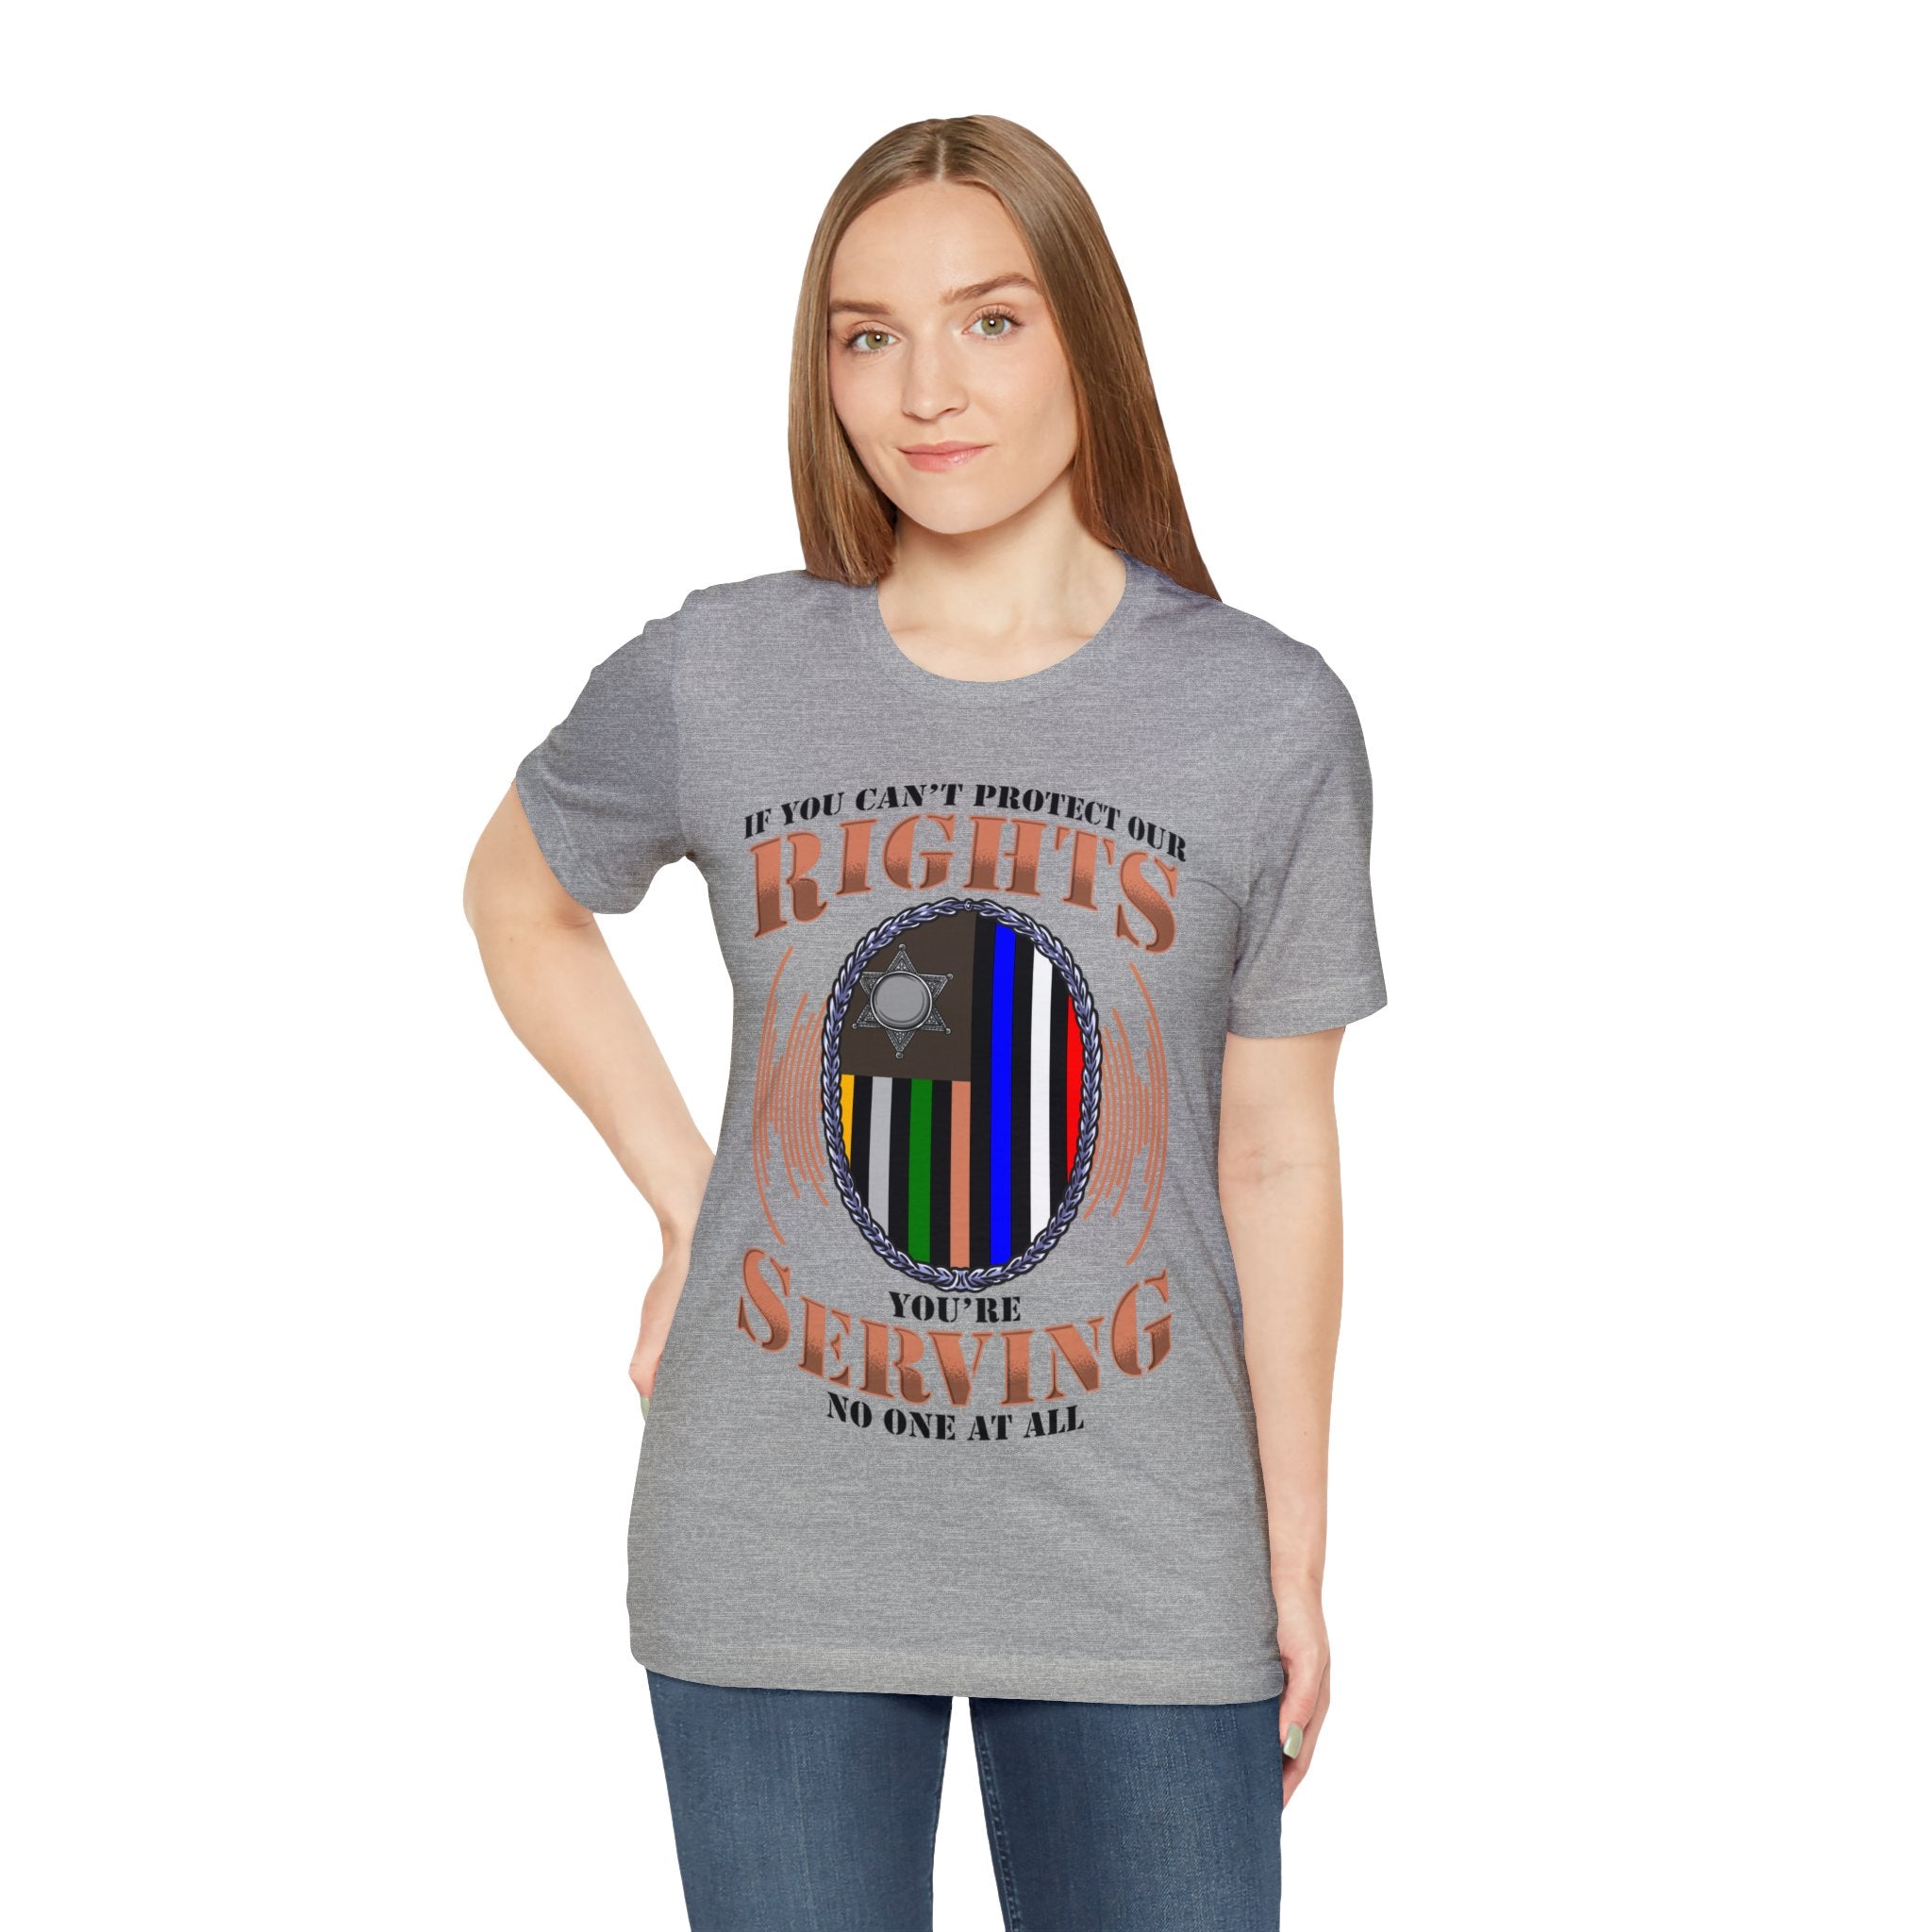 Thin Communications Line Tee - Rights/Serving